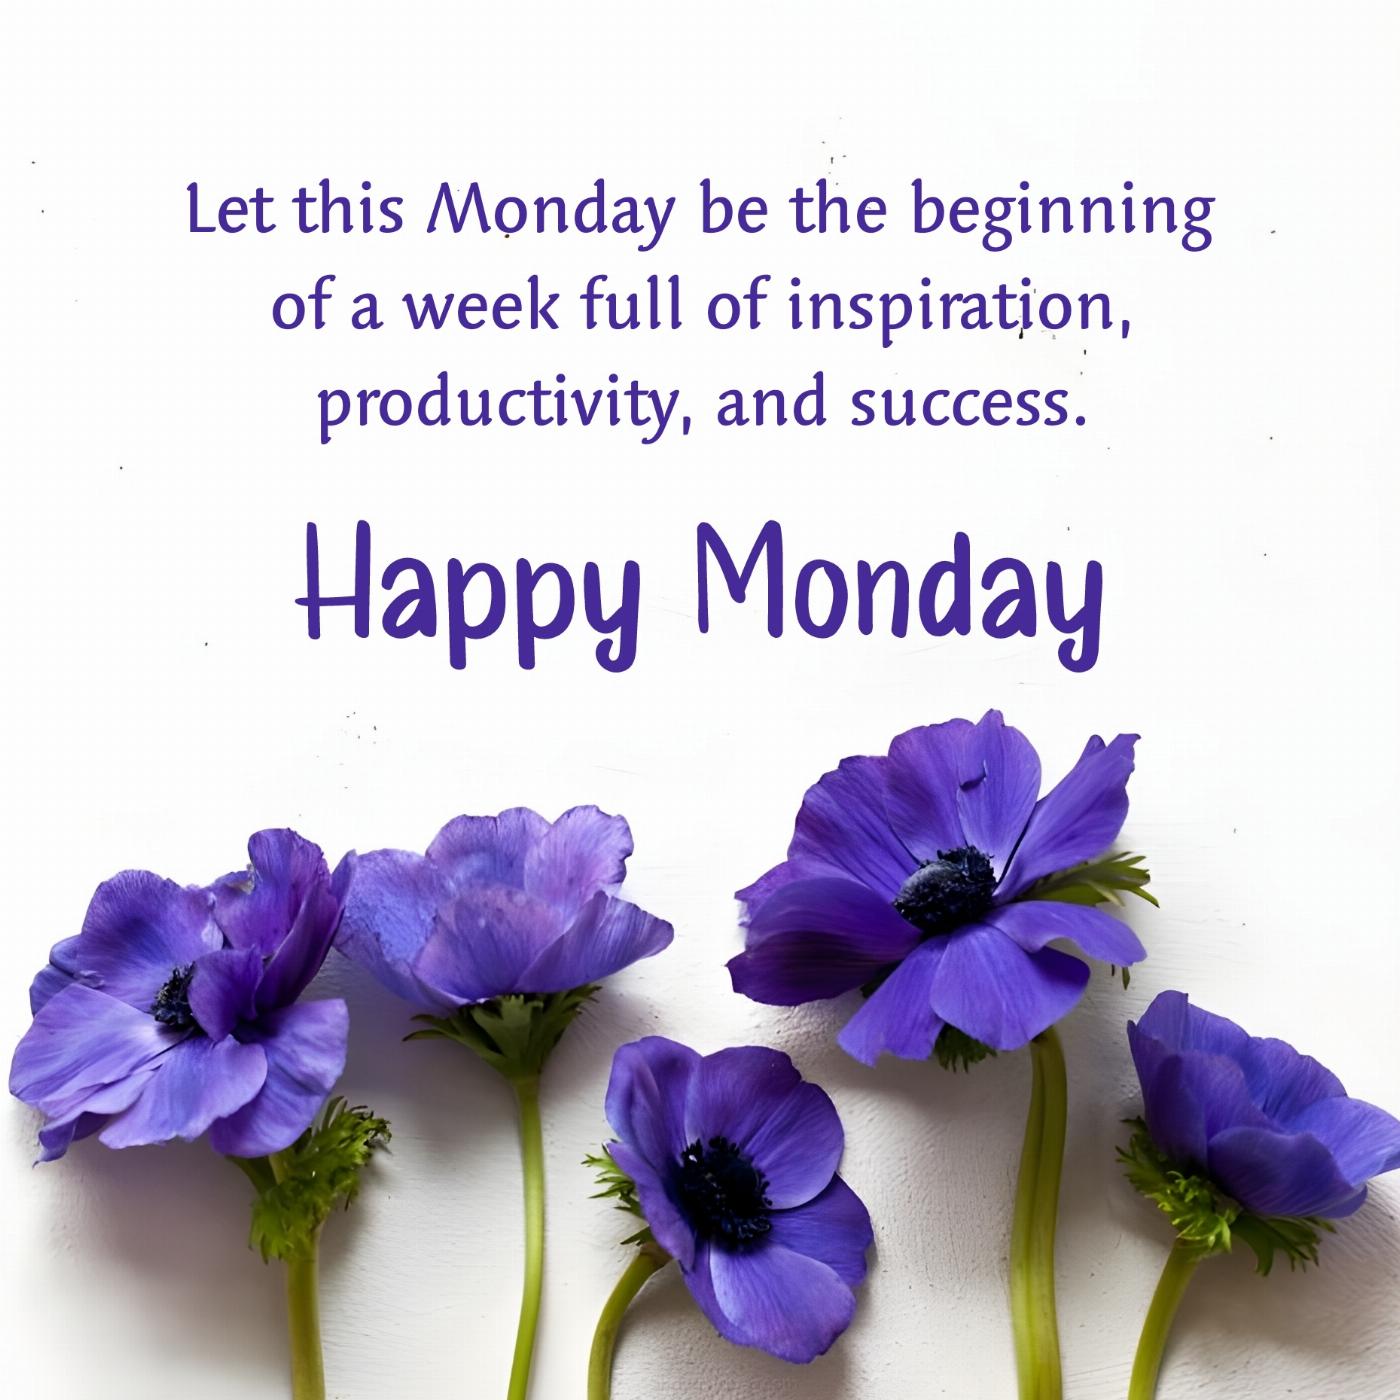 Let this Monday be the beginning of a week full of inspiration